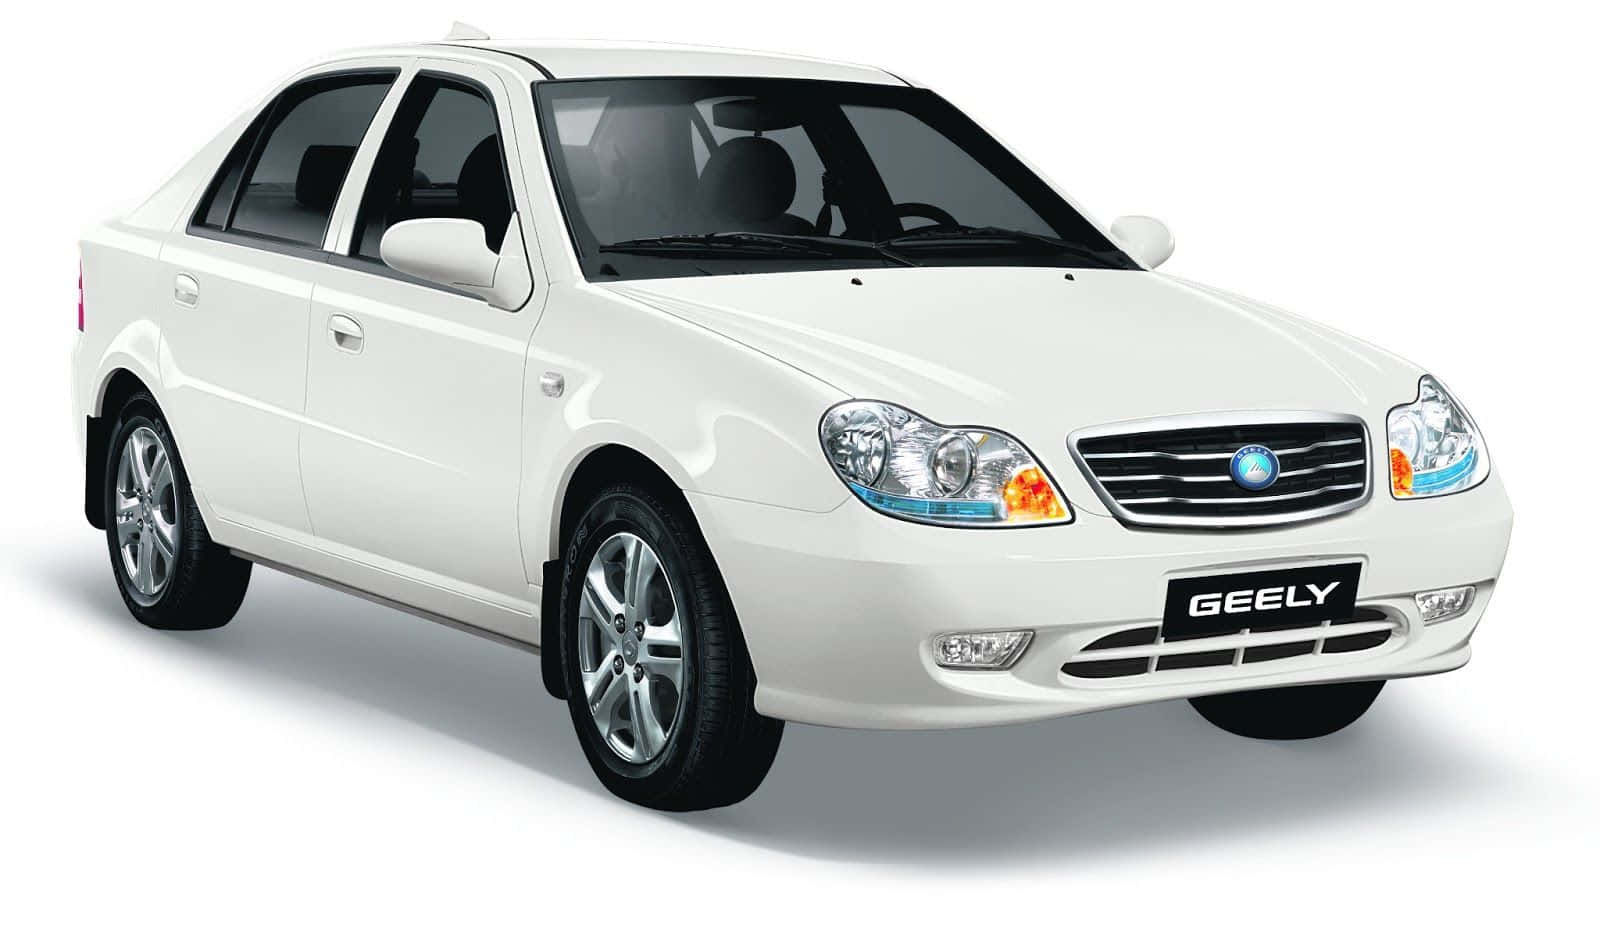 Stunning Geely Vehicle in a Scenic Setting Wallpaper